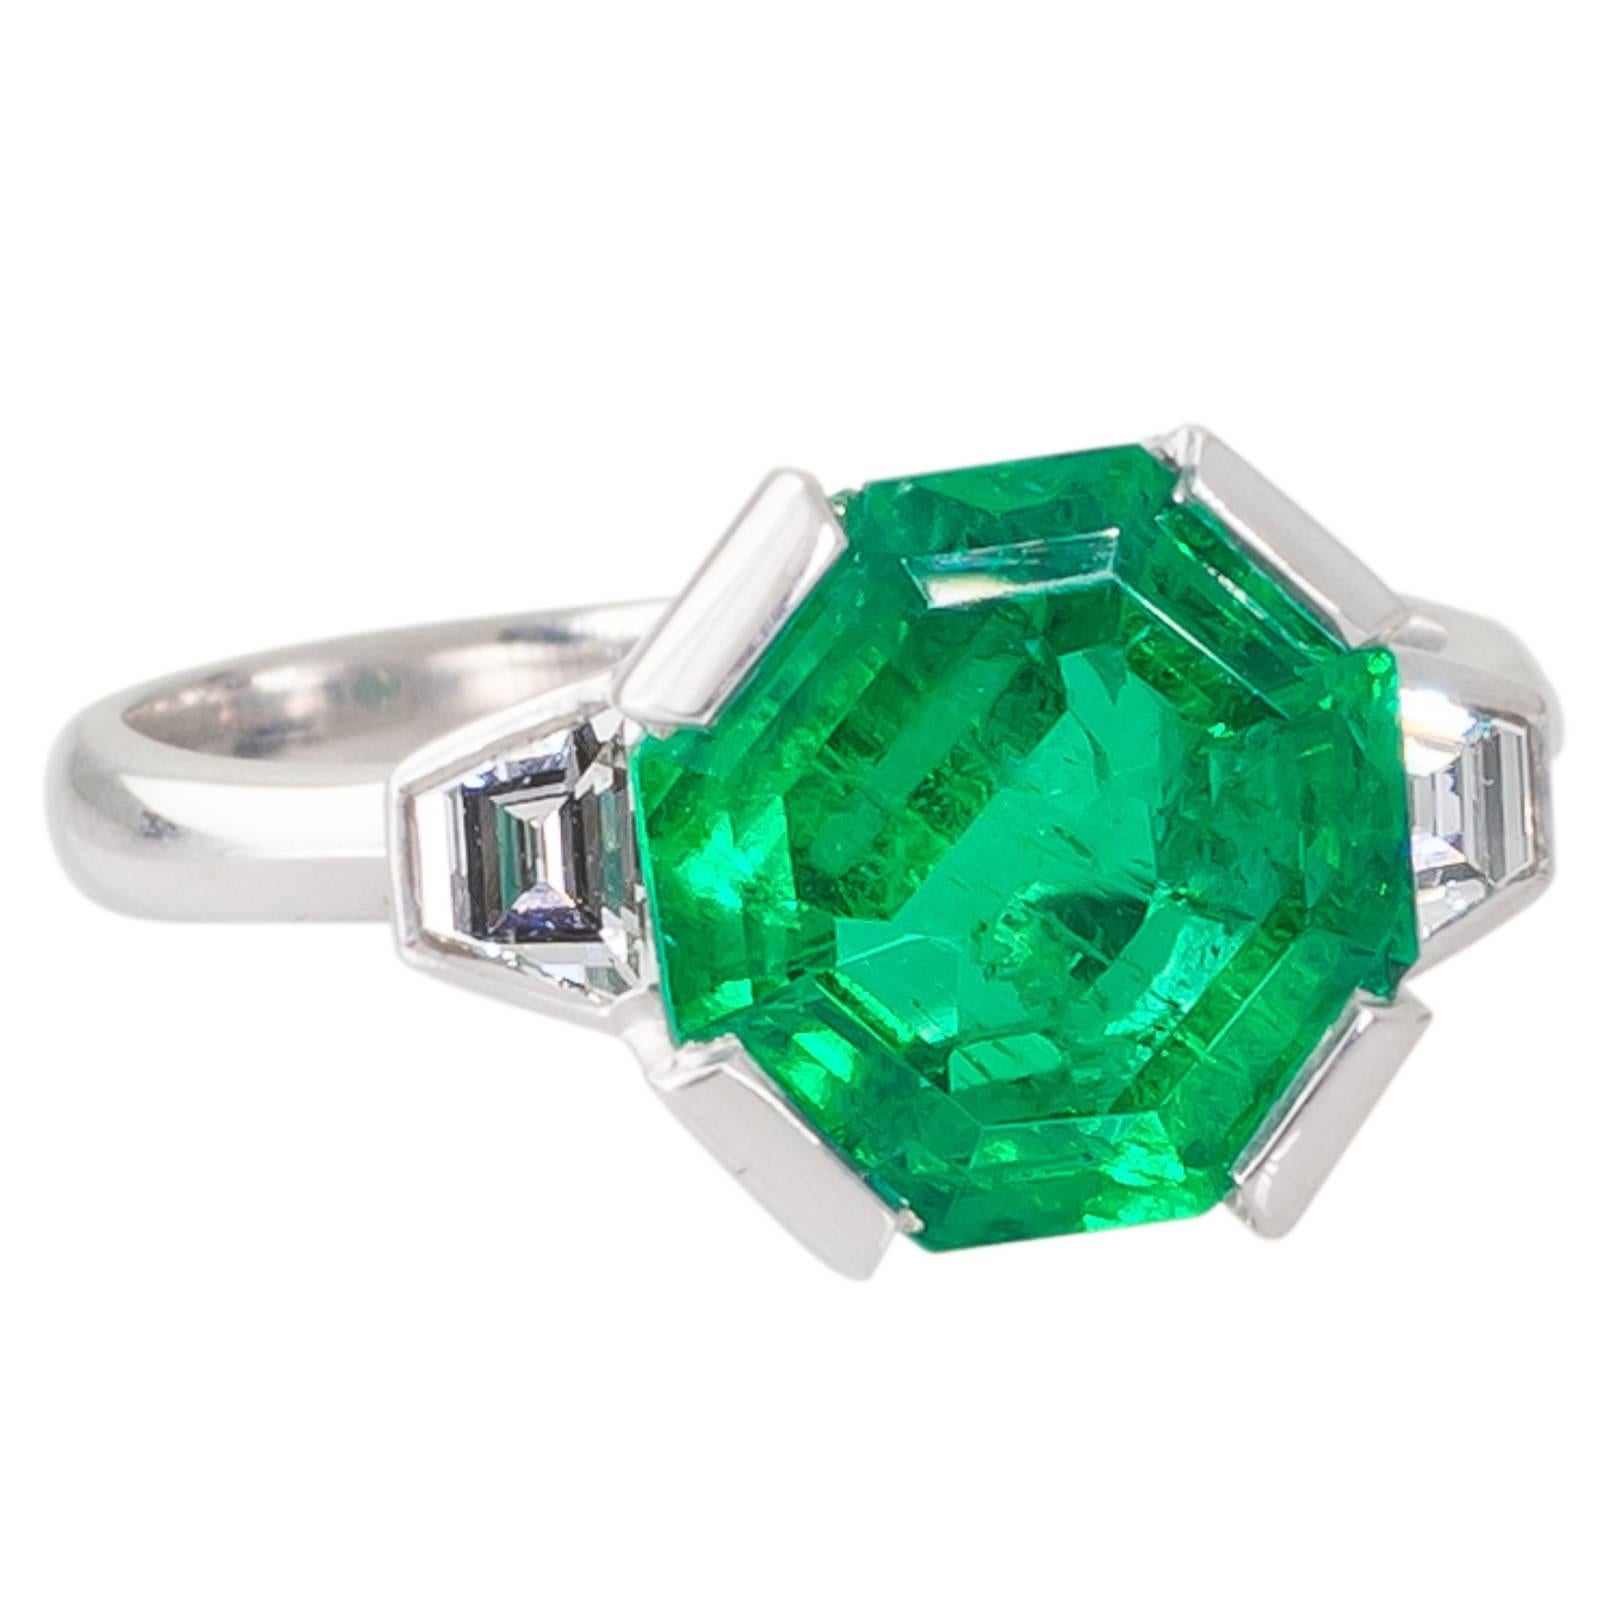 Handmade 2.94 Carat Colombian Emerald and Diamond Ring For Sale